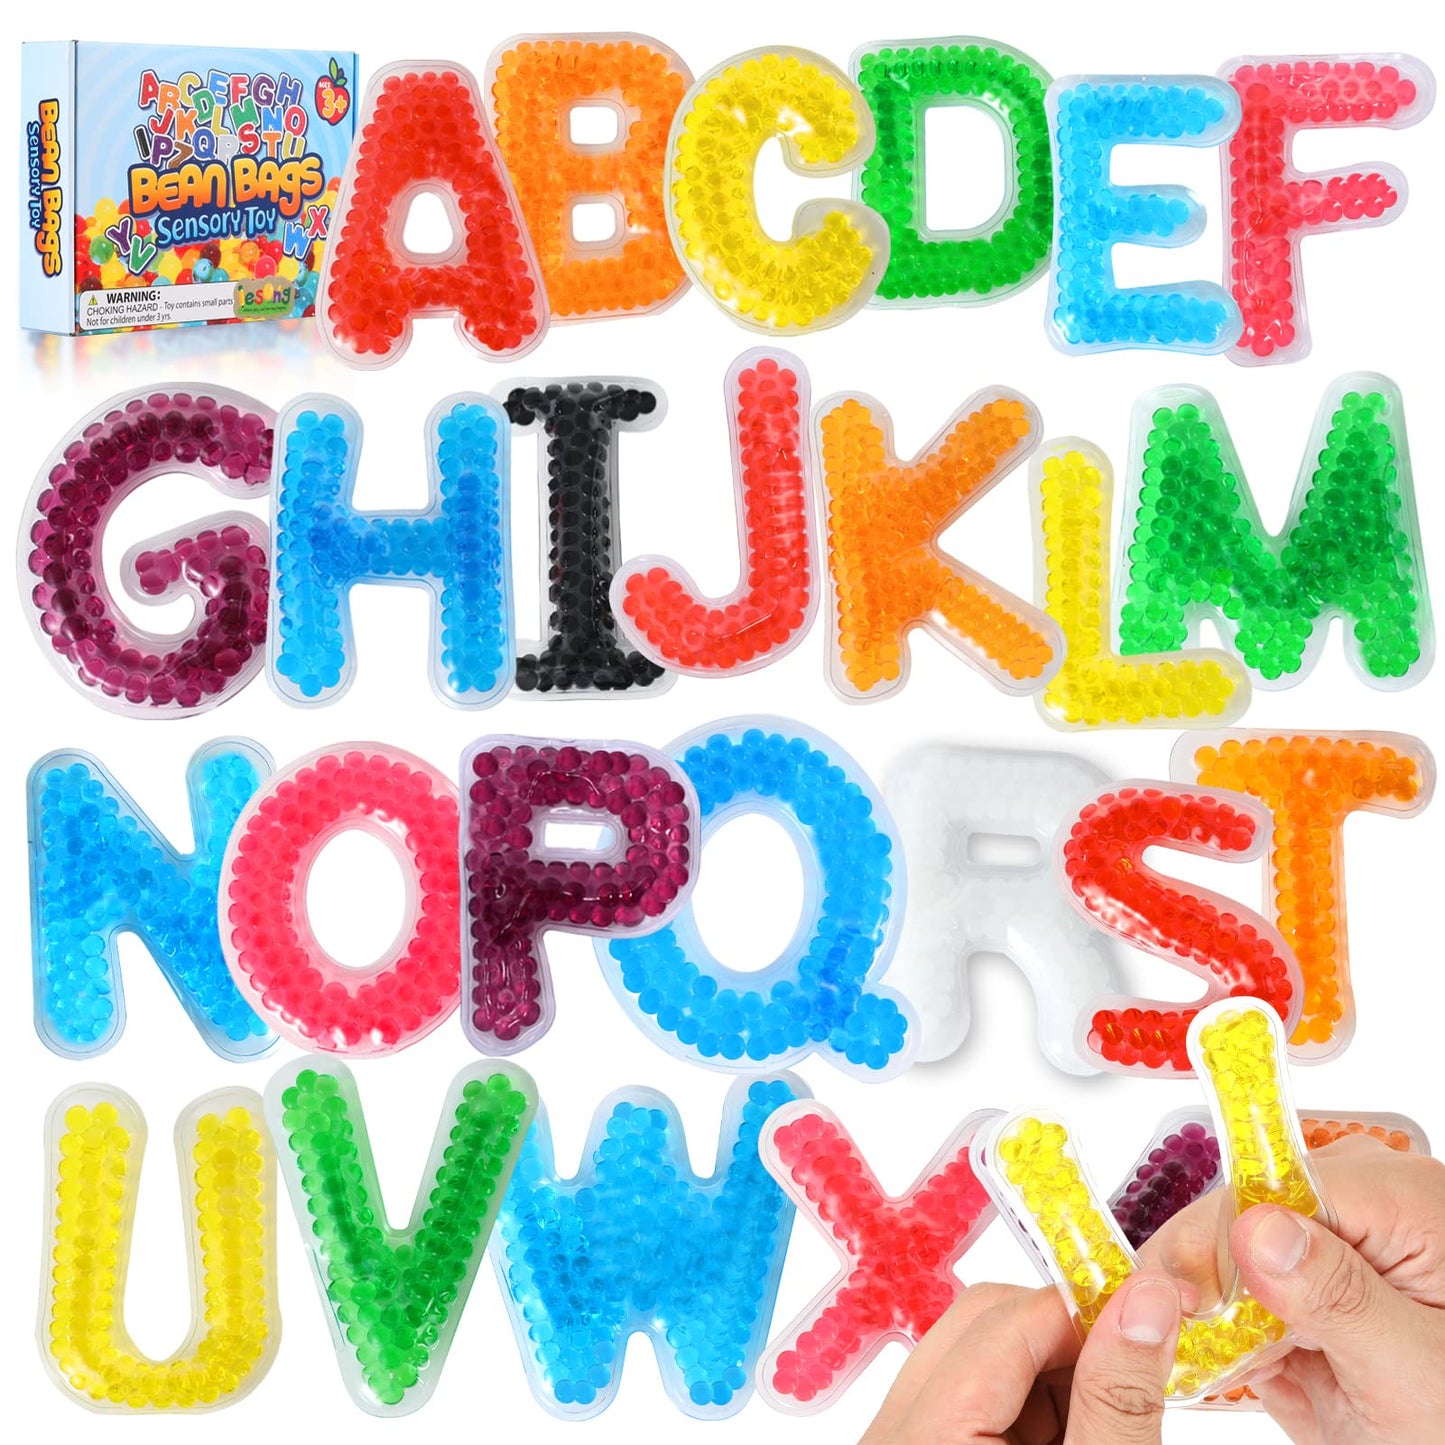 LESONG Alphabet Letters Sensory Toys for Kids: ABC Learning Educational Montessori Toys for Preschool Toddlers 3 4 5 6 Years Old, Water Beads Fidget Sensory Toys for Autistic Children Anxiety Relief